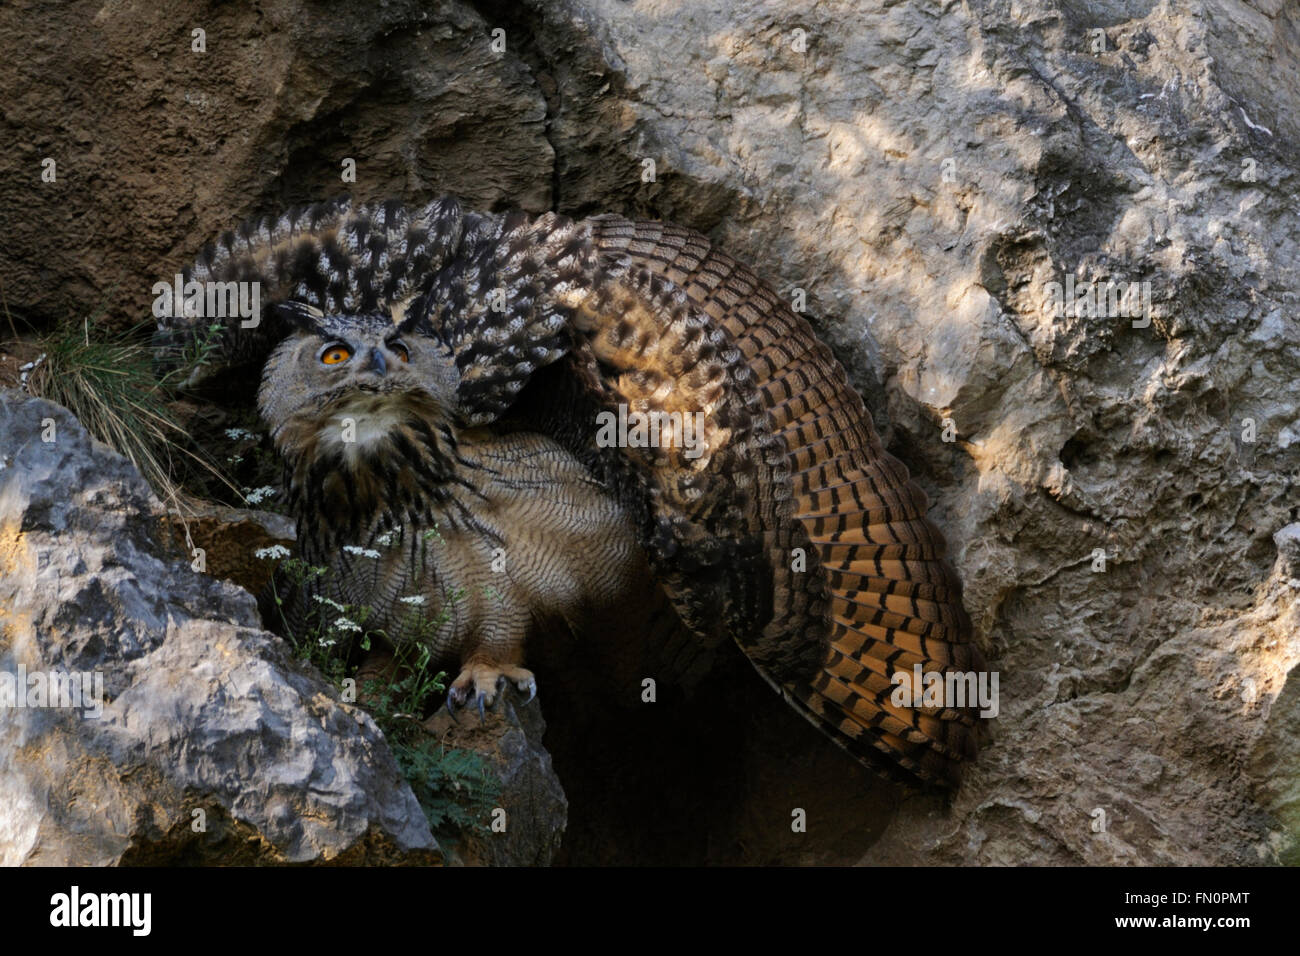 Eurasian Eagle Owl / Europaeischer Uhu  ( Bubo bubo ), ruffling its feathers to appear larger, in threatening posture. Stock Photo